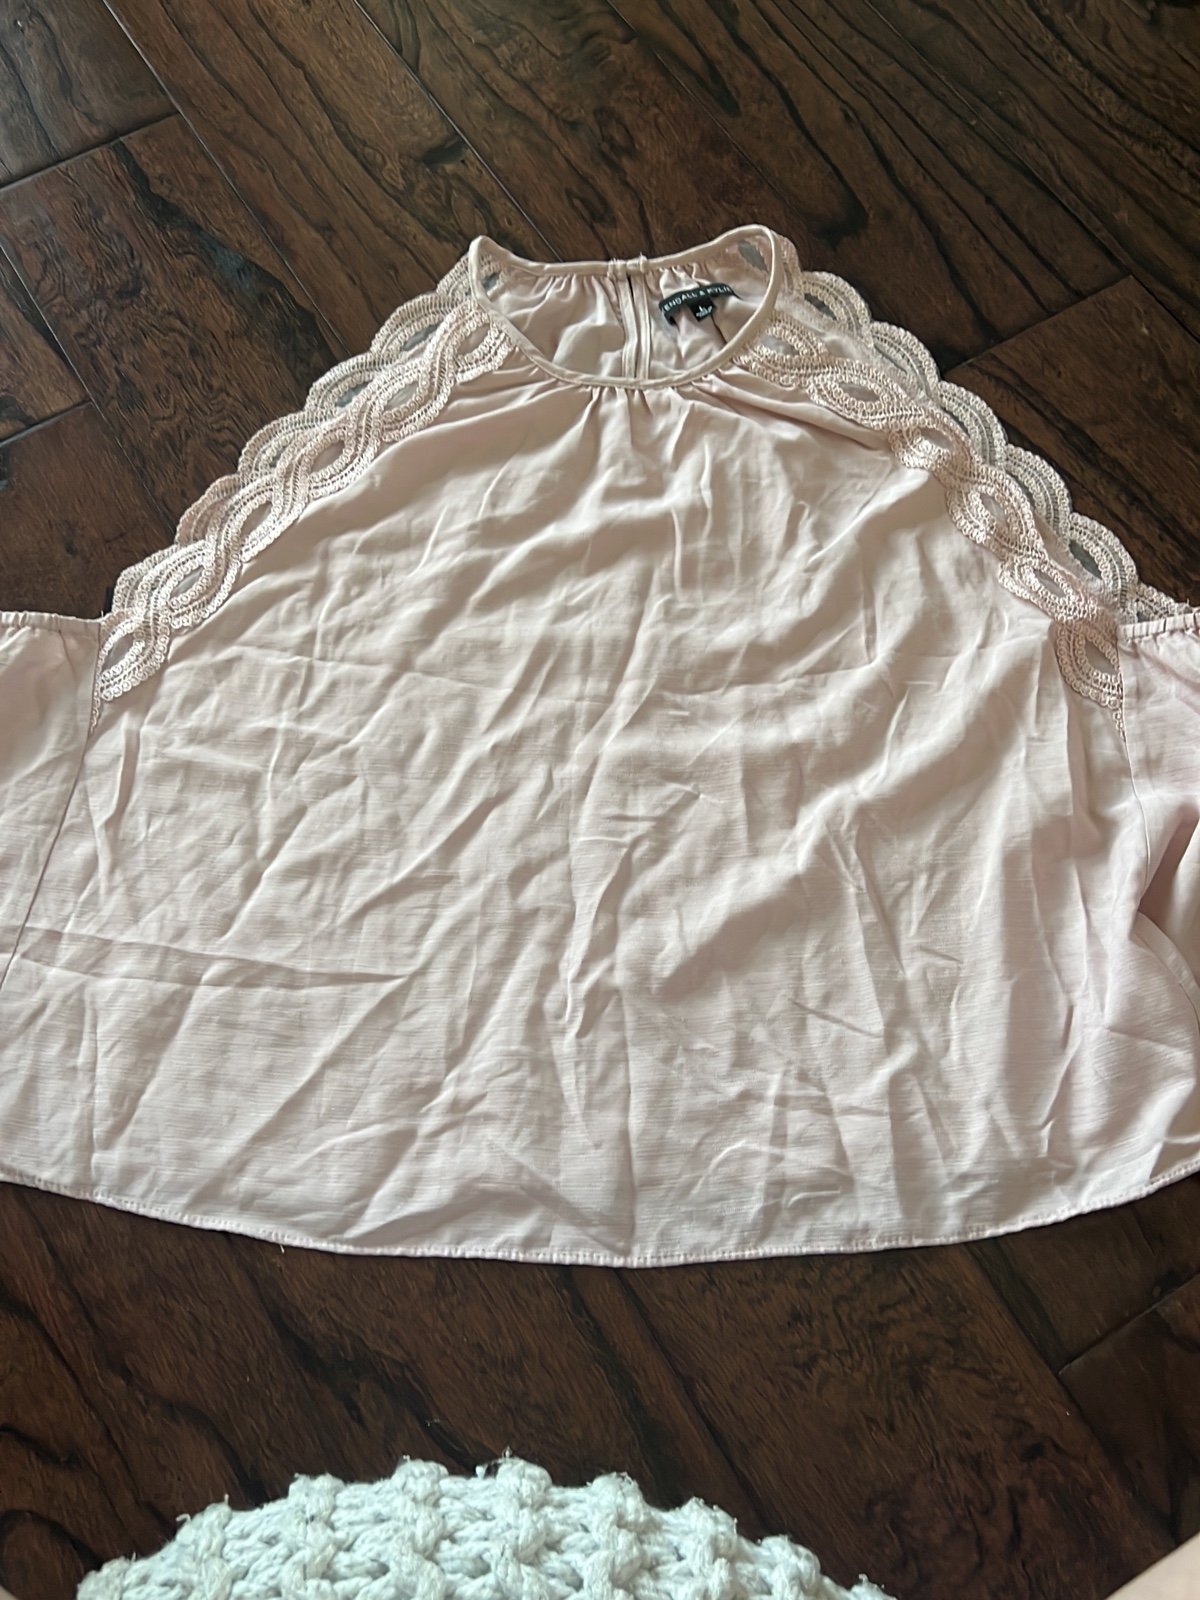 Discounted Kendall & Kylie high neck cropped tank top. Size large, its pale pink /blush col JIQKmhGjh Wholesale